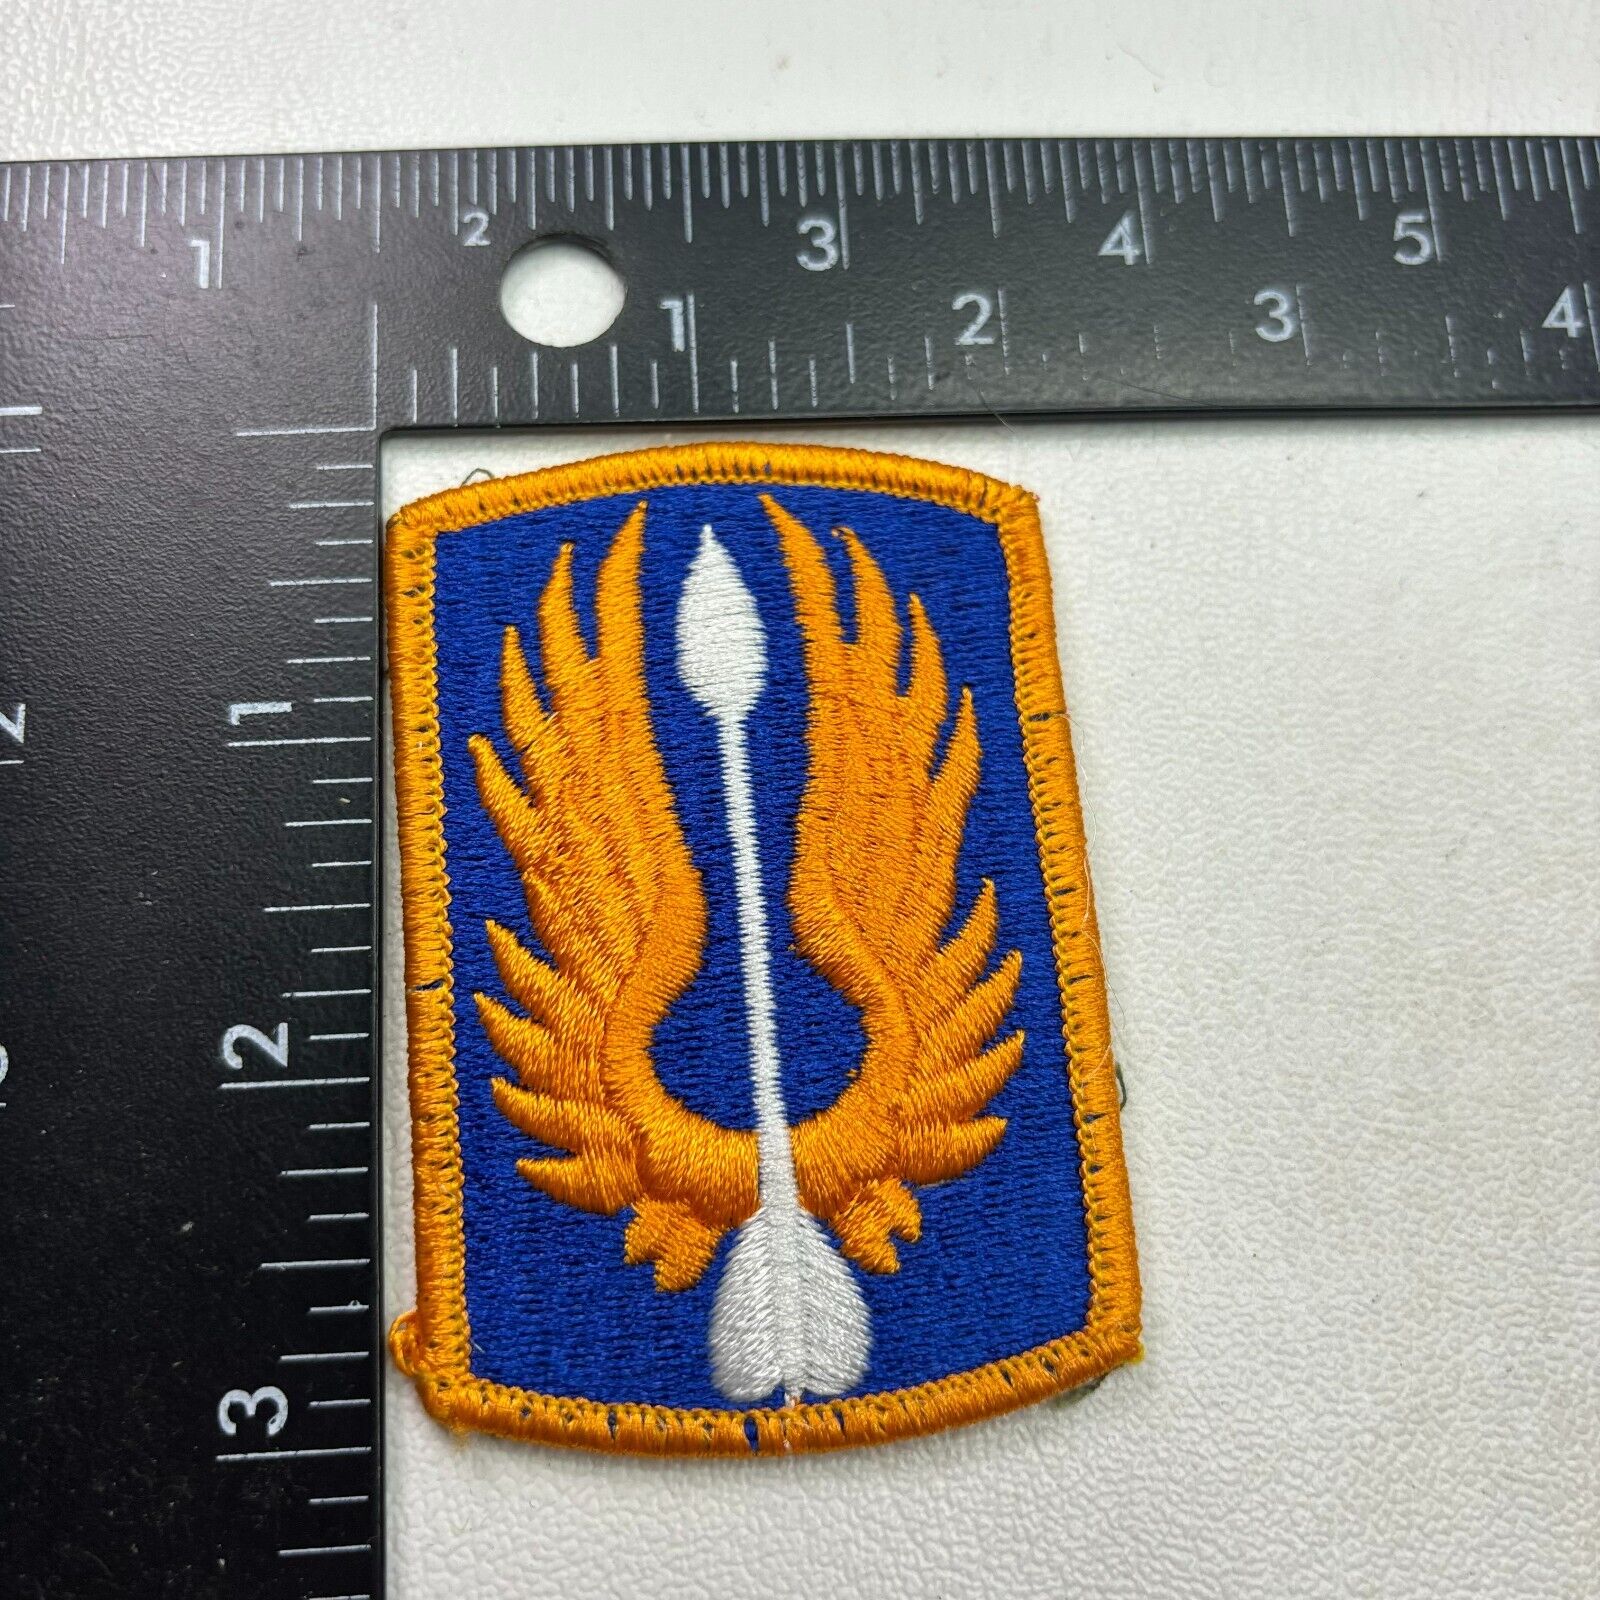 United States Army 18TH AVIATION BRIGADE Patch - military 43NL